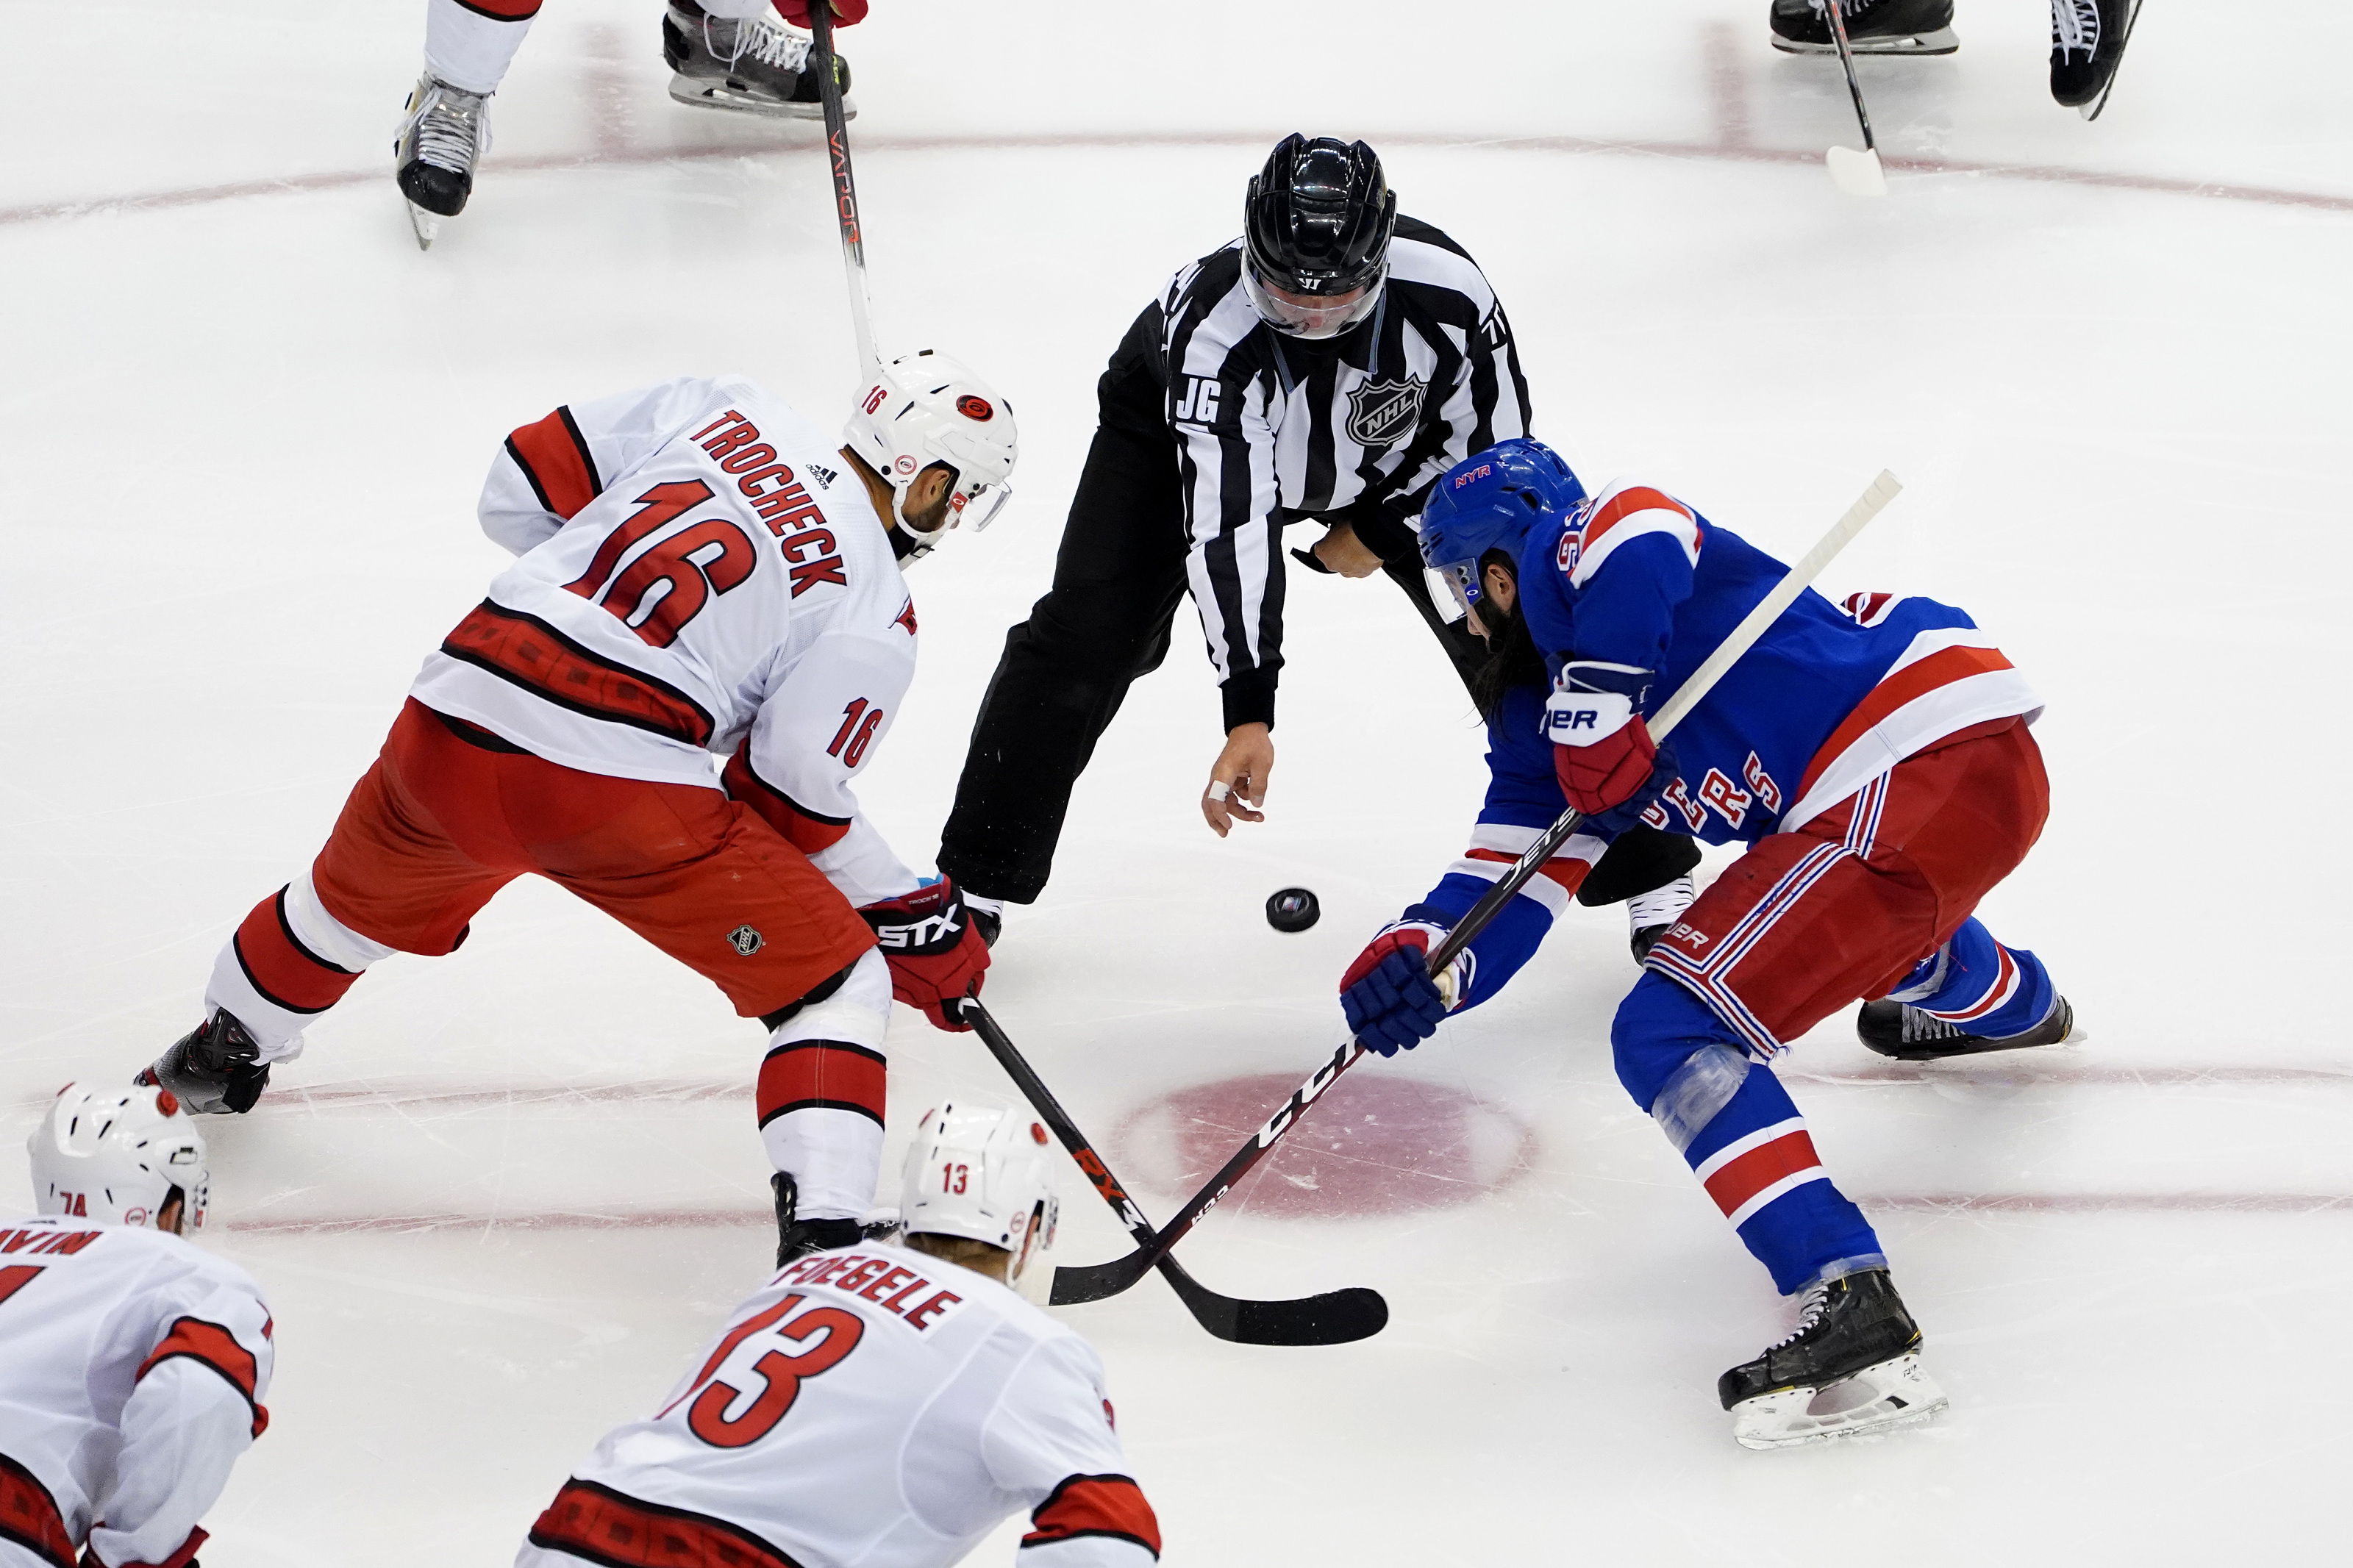 DeAngelo 'disappointed about the way things ended' with Rangers